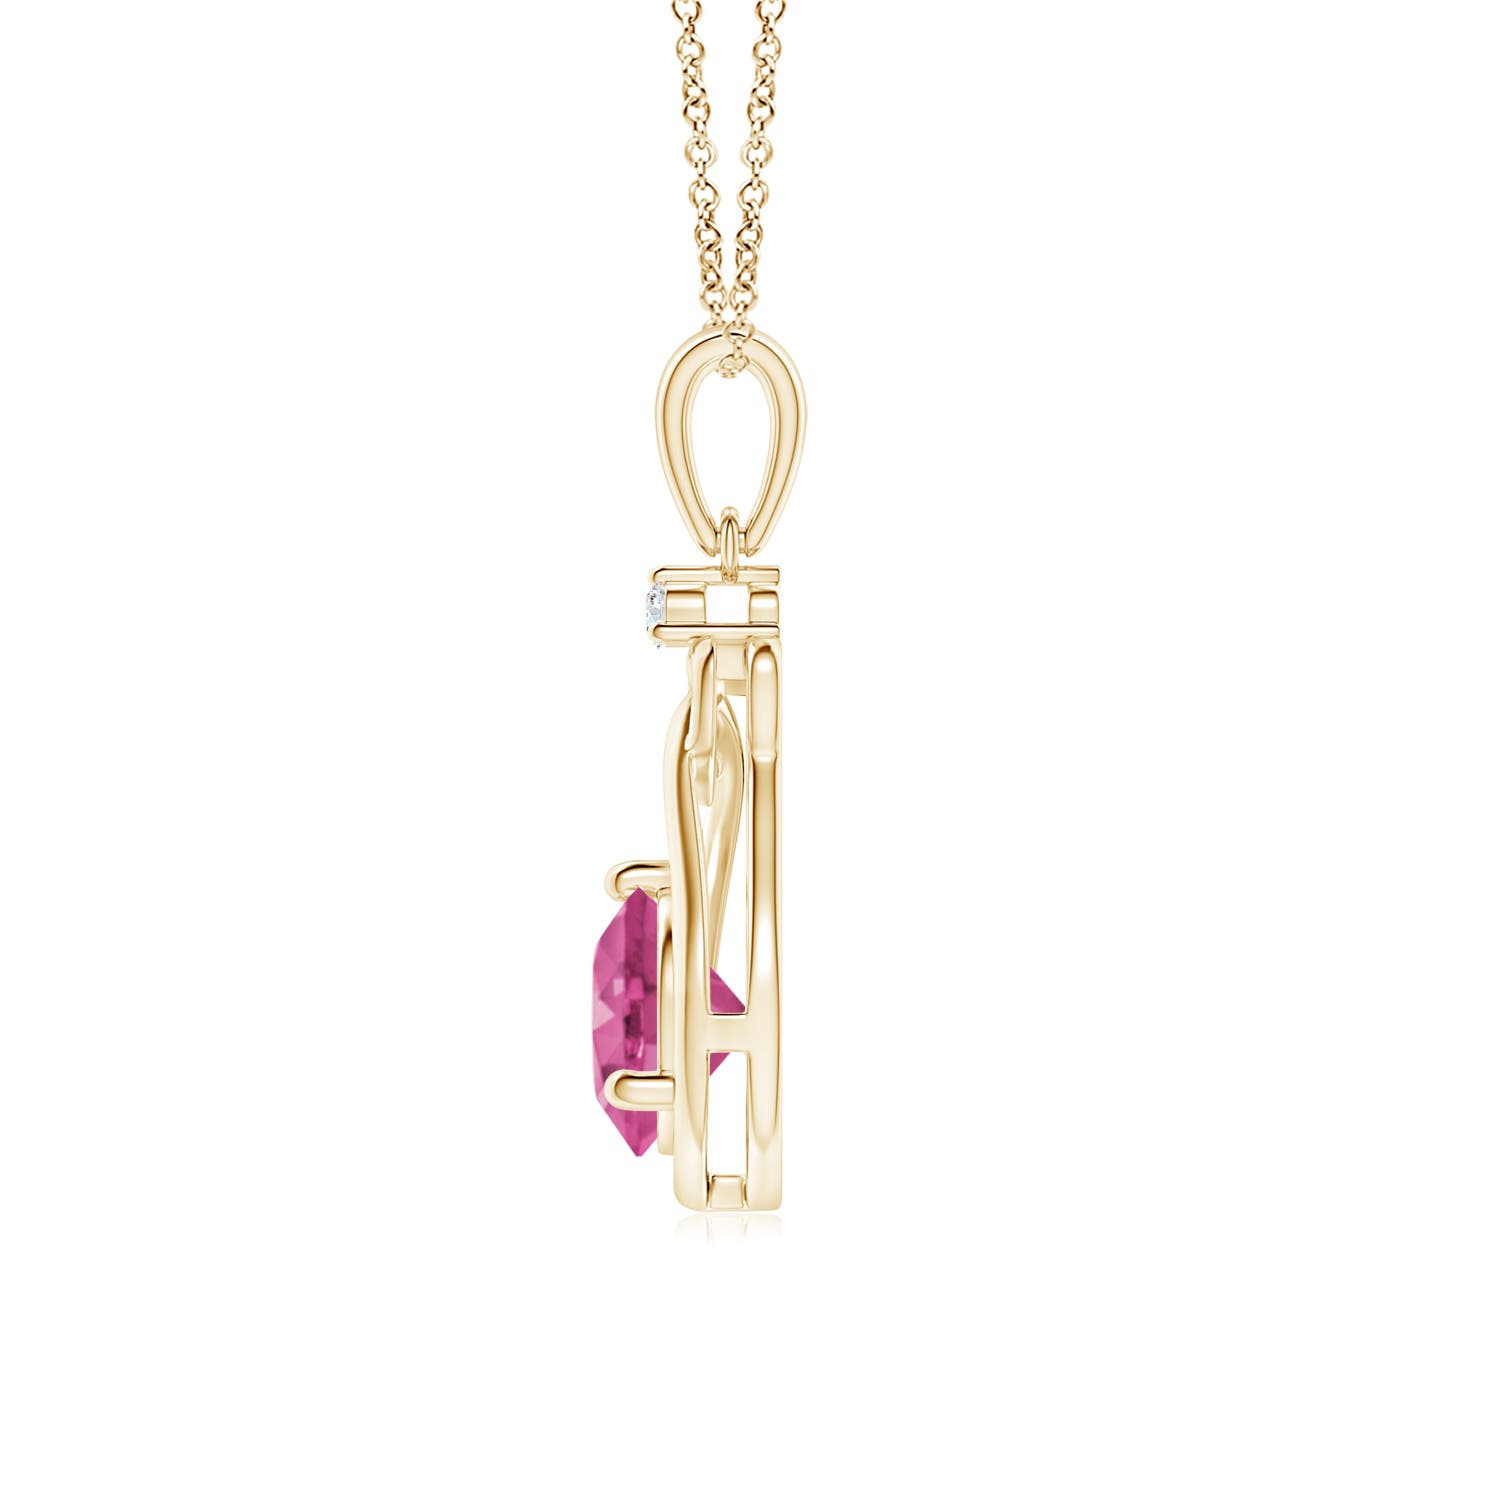 AAAA - Pink Sapphire / 1.01 CT / 14 KT Yellow Gold